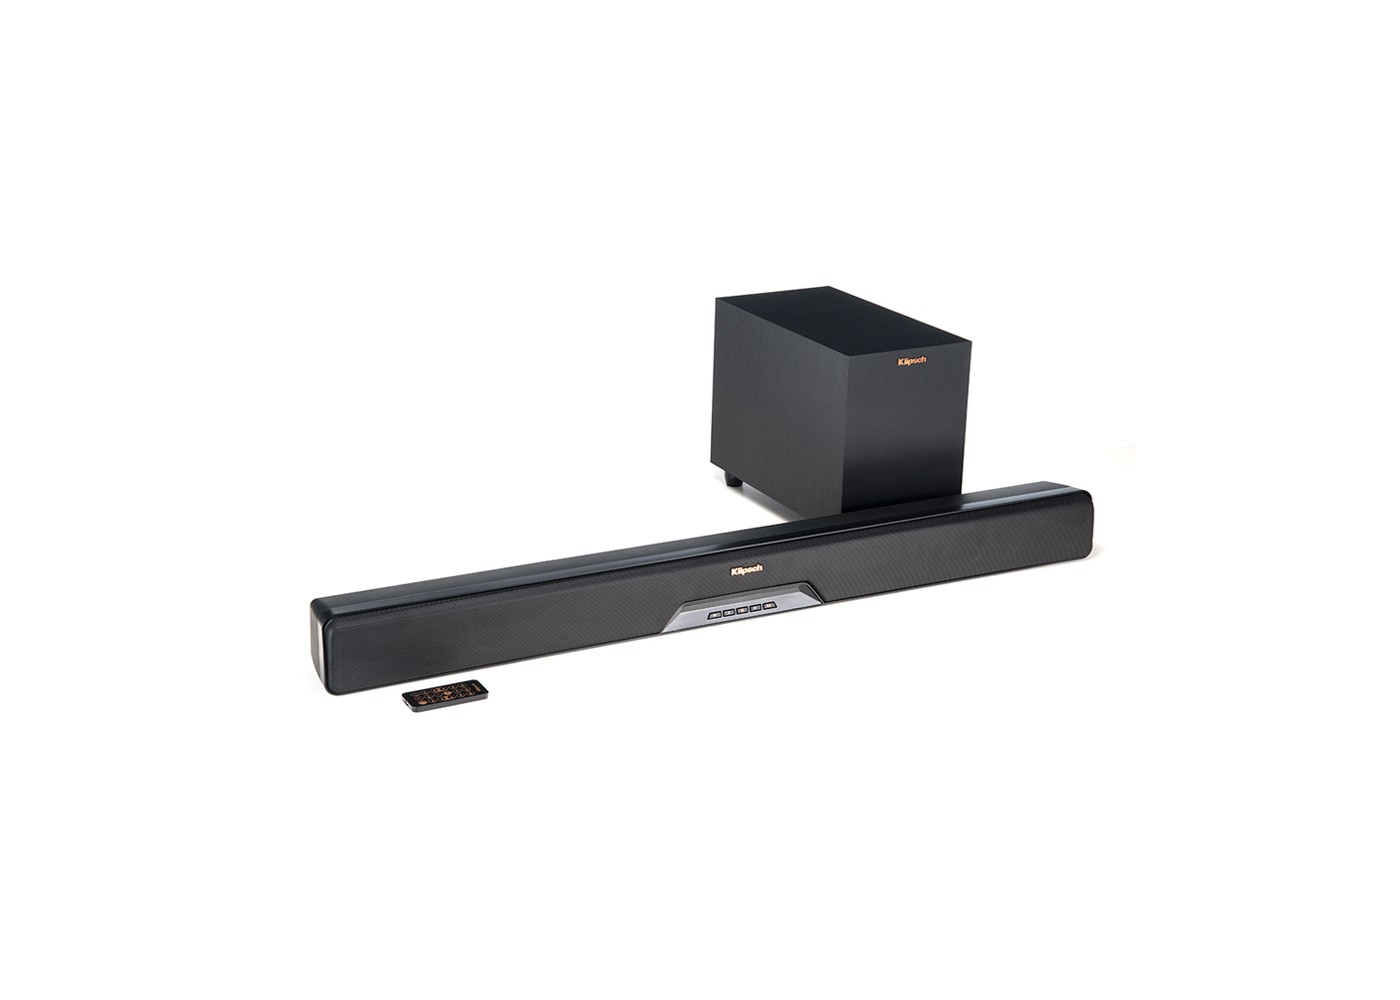 Klipsch Reference RSB-6 Sound Bar with Wireless Subwoofer